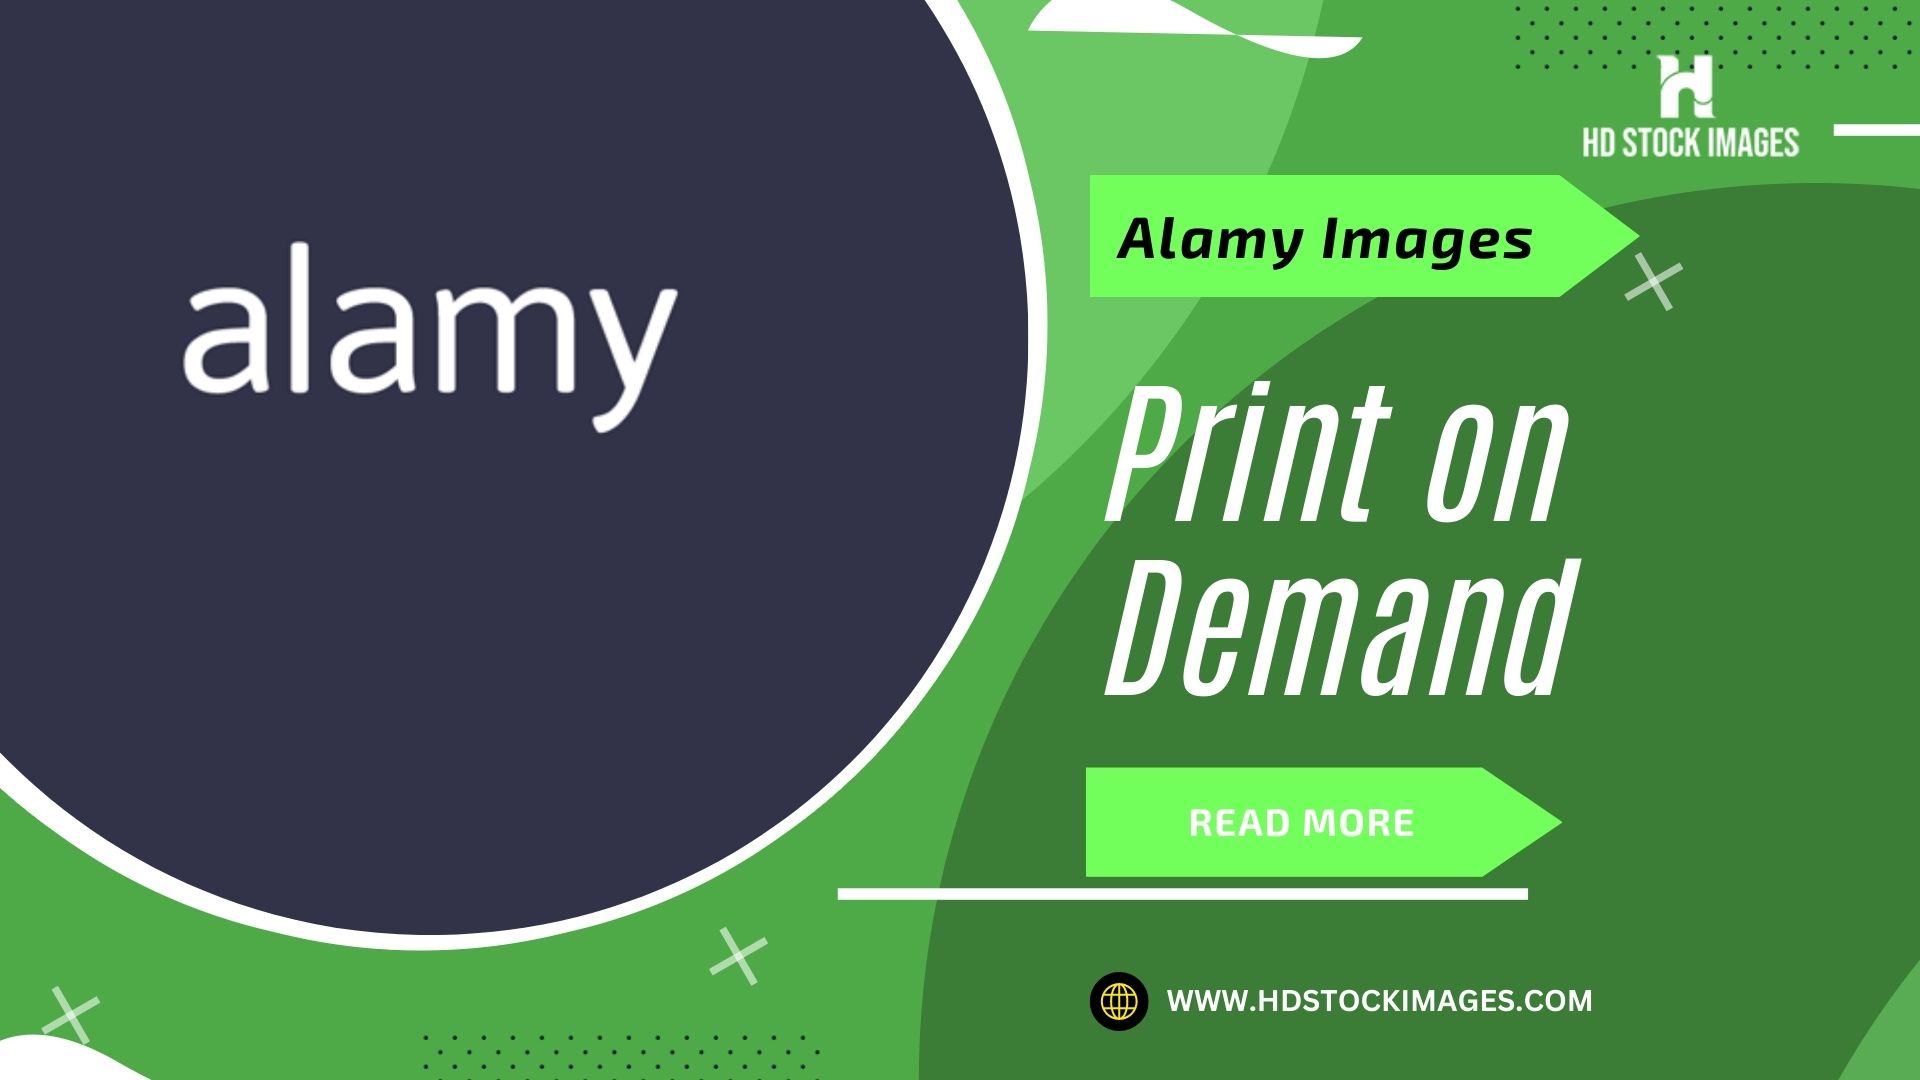 Print on Demand and Alamy Images: Exploring Usage Rights and Licensing Opportunities